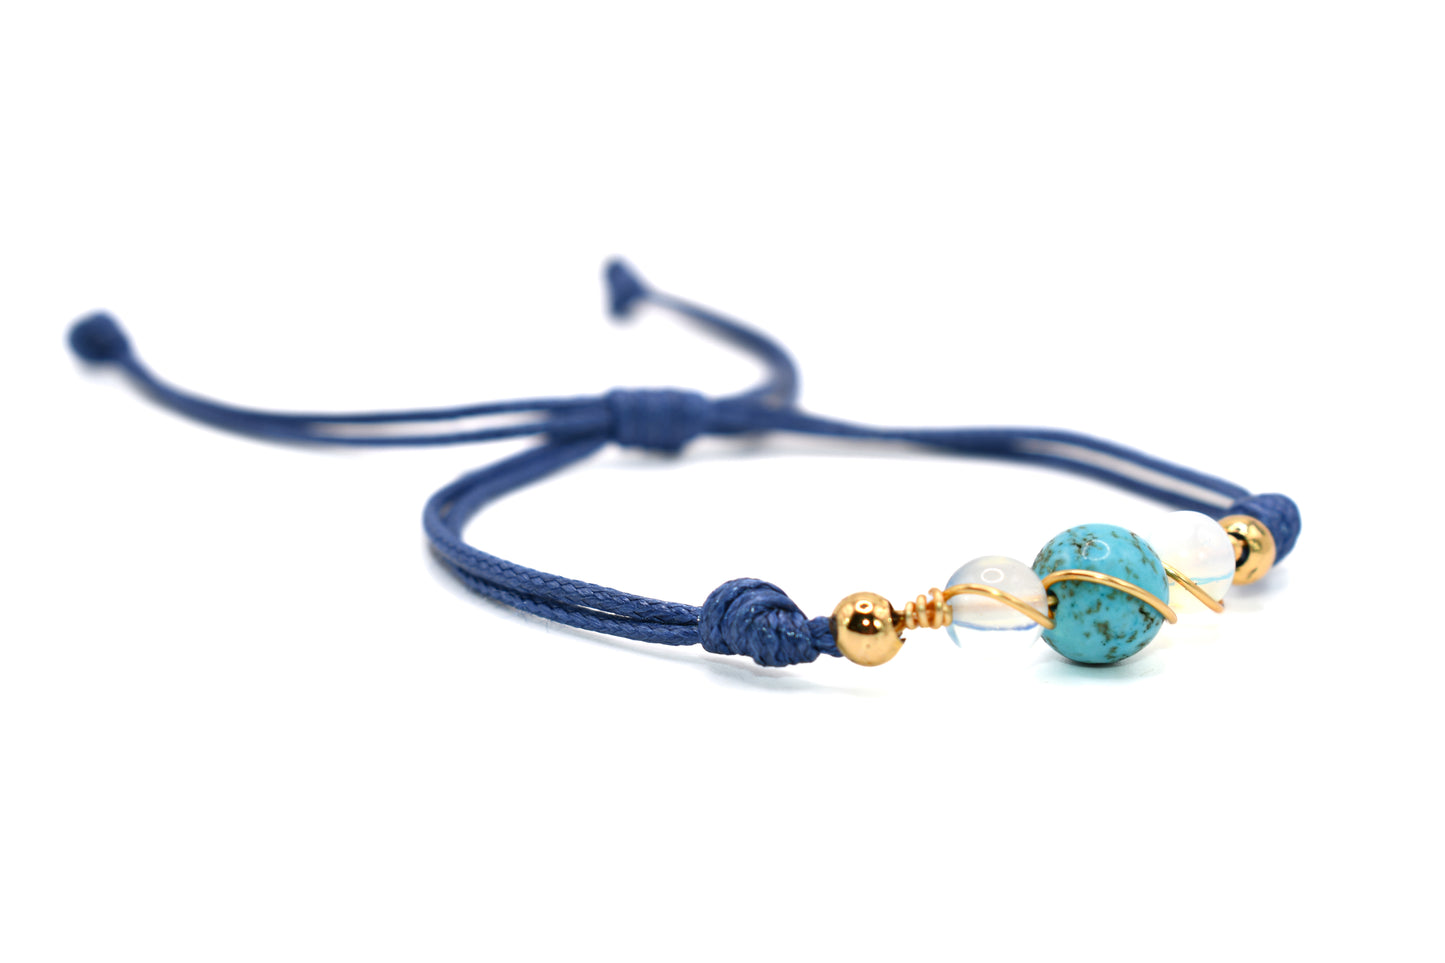 Turquoise with Double Clear Quartz Natural Stone Adorned with Gold Plated Accents on a Blue String Handmade Bracelet | Adjustable and Healing